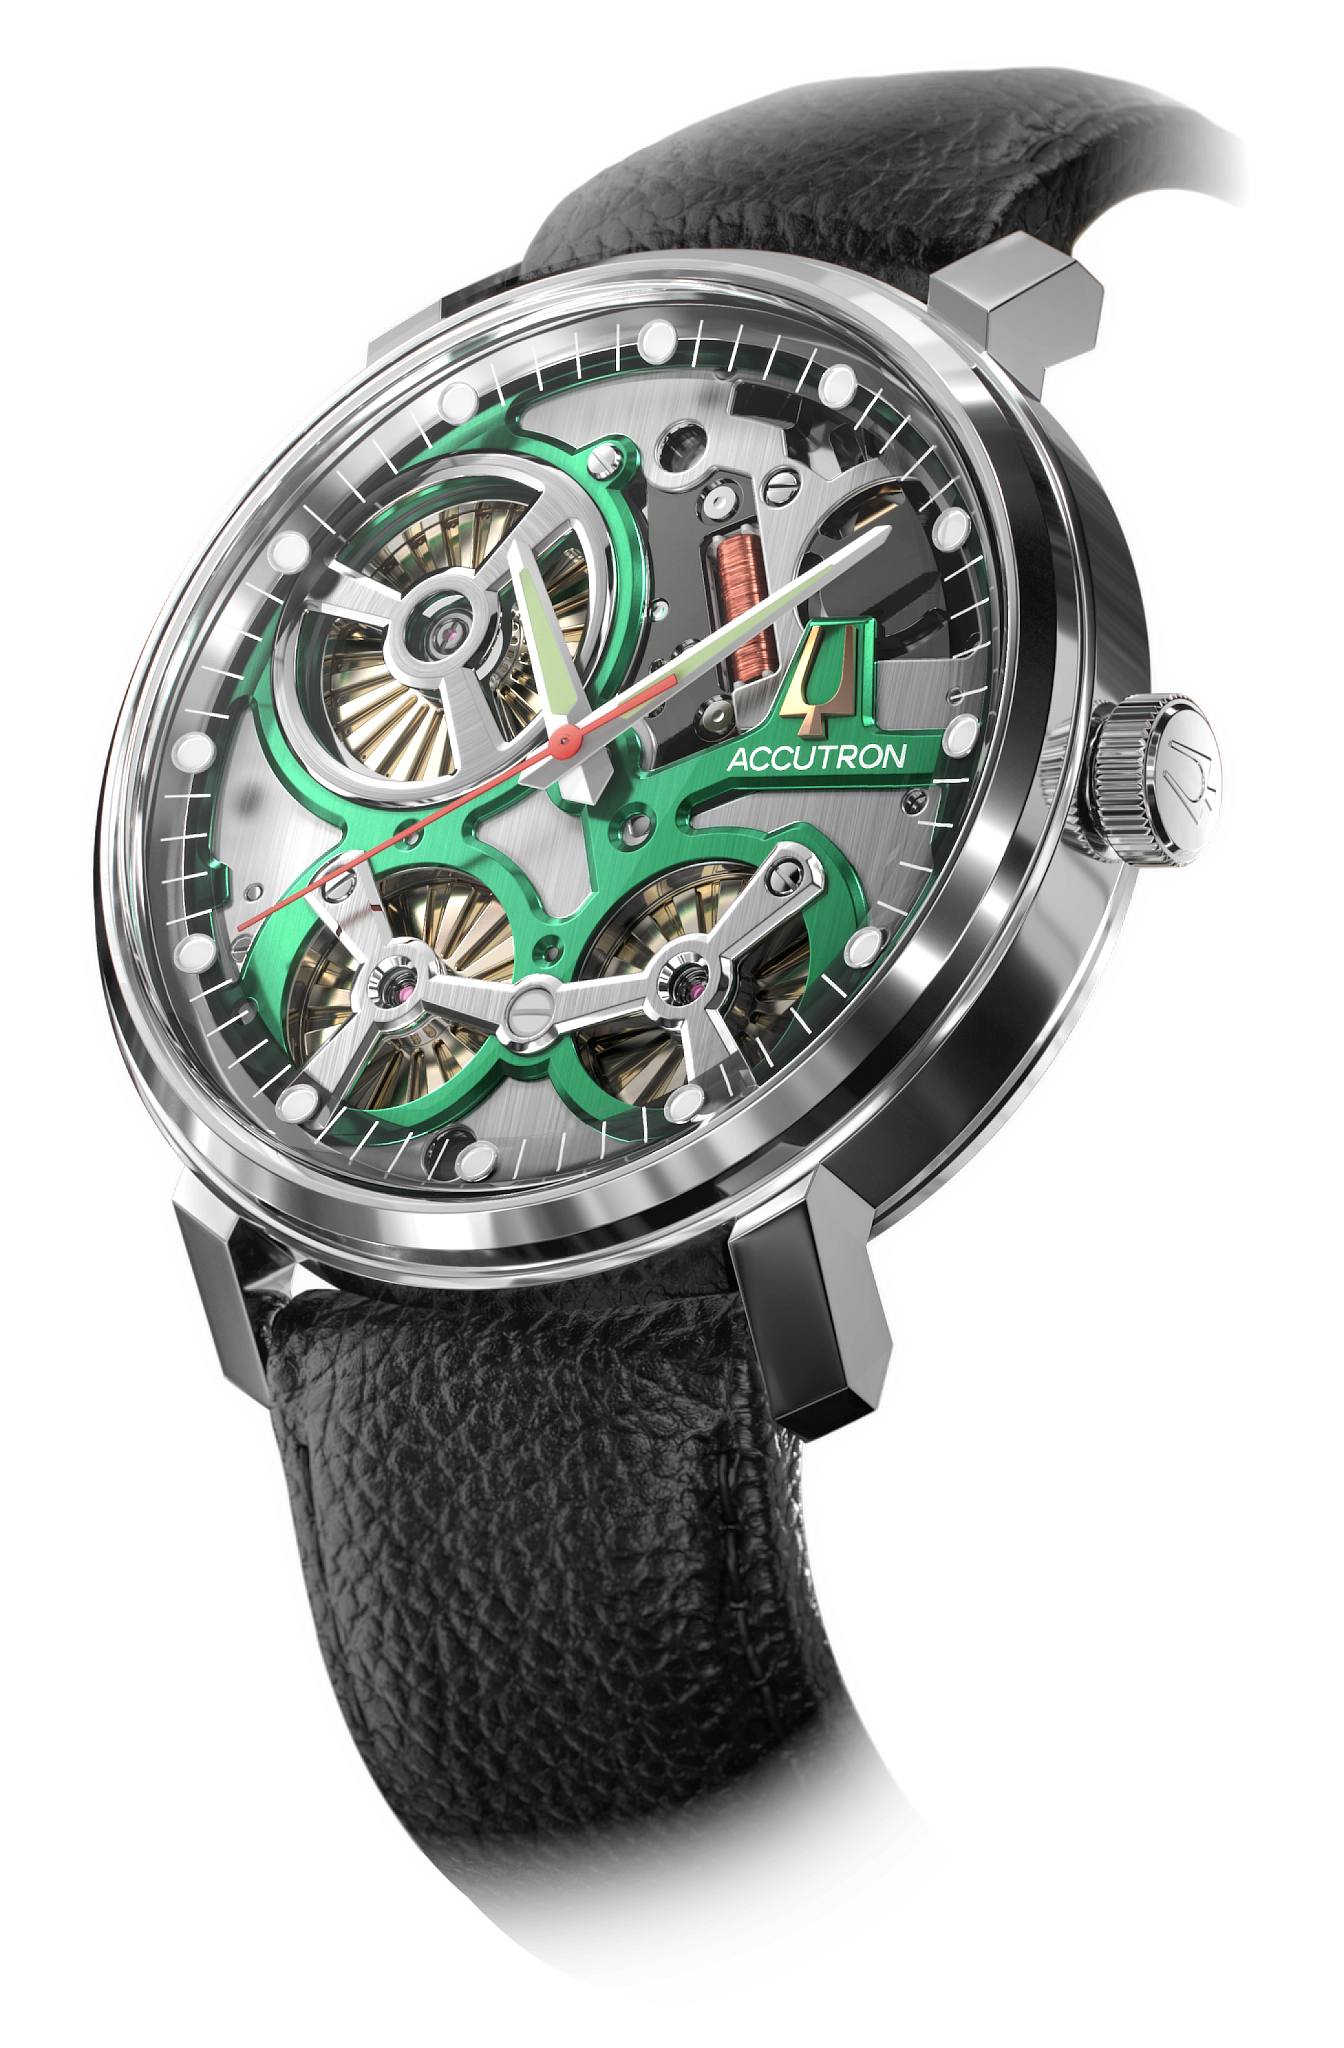 Accutron recalls '60's With Legacy Line